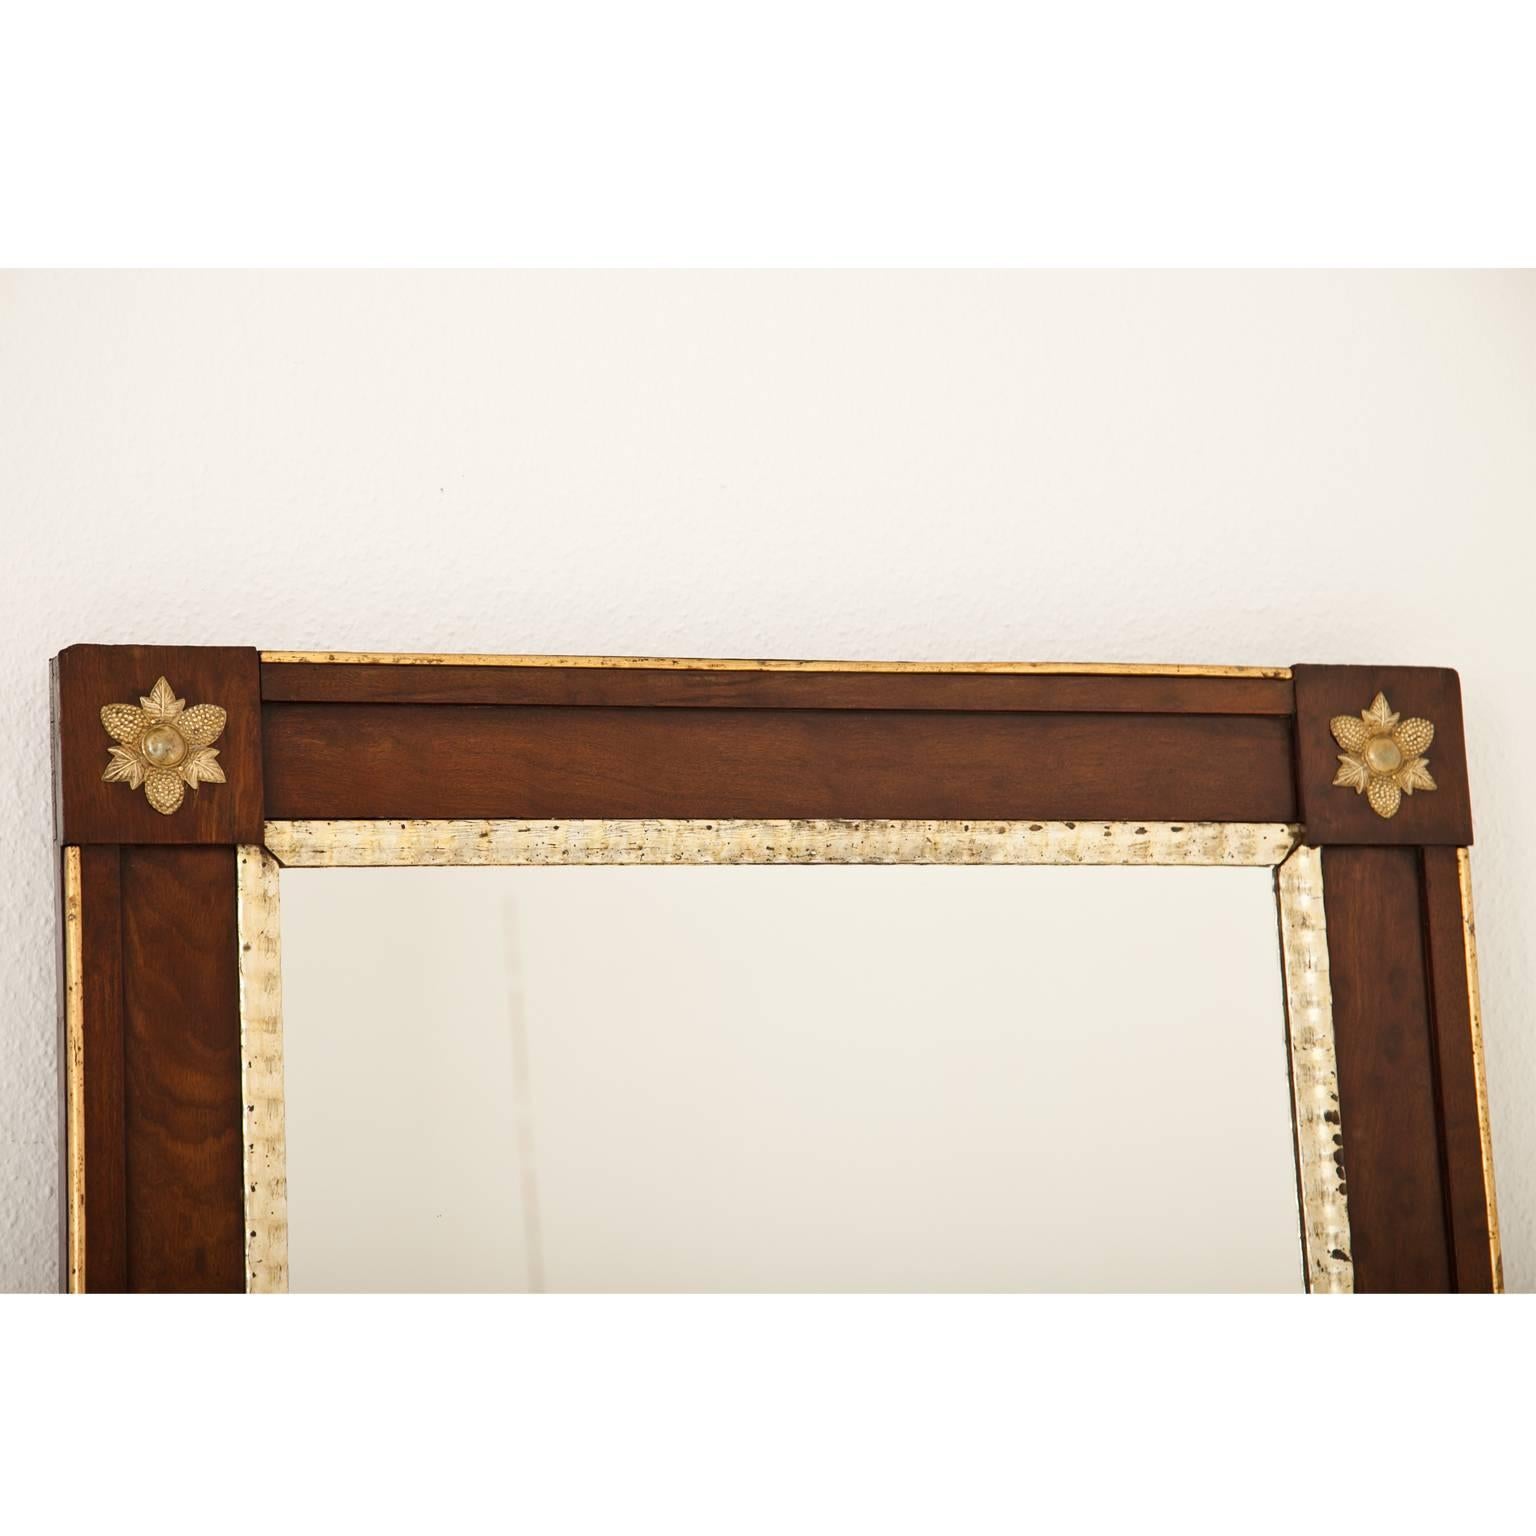 Wood Empire Wall Mirror, First Half of the 19th Century